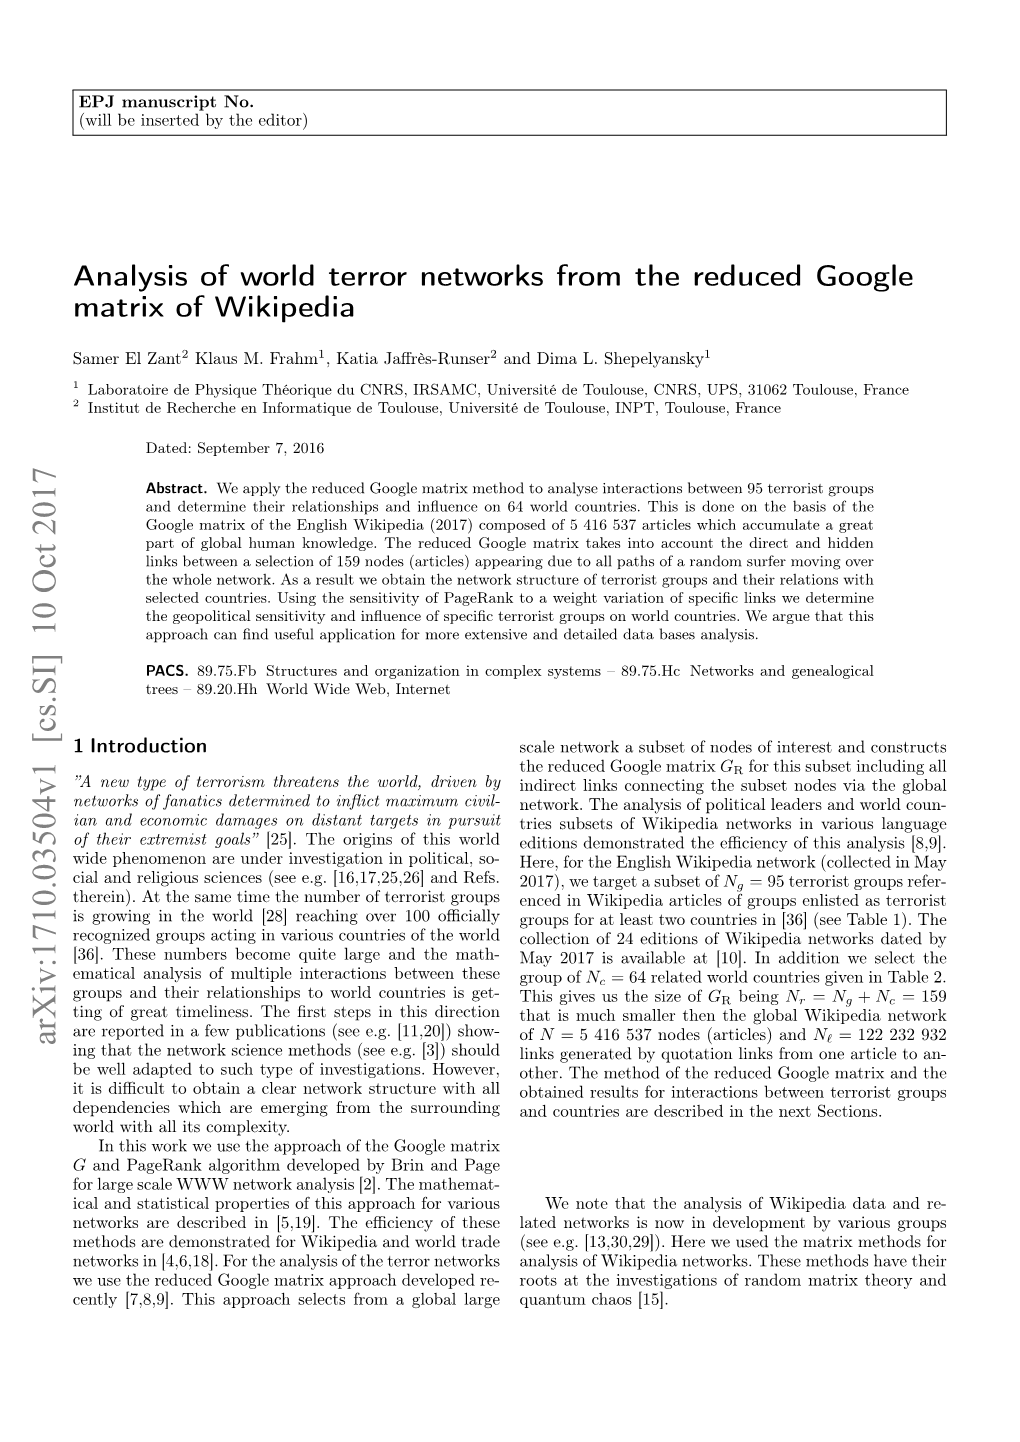 Analysis of World Terror Networks from the Reduced Google Matrix of Wikipedia